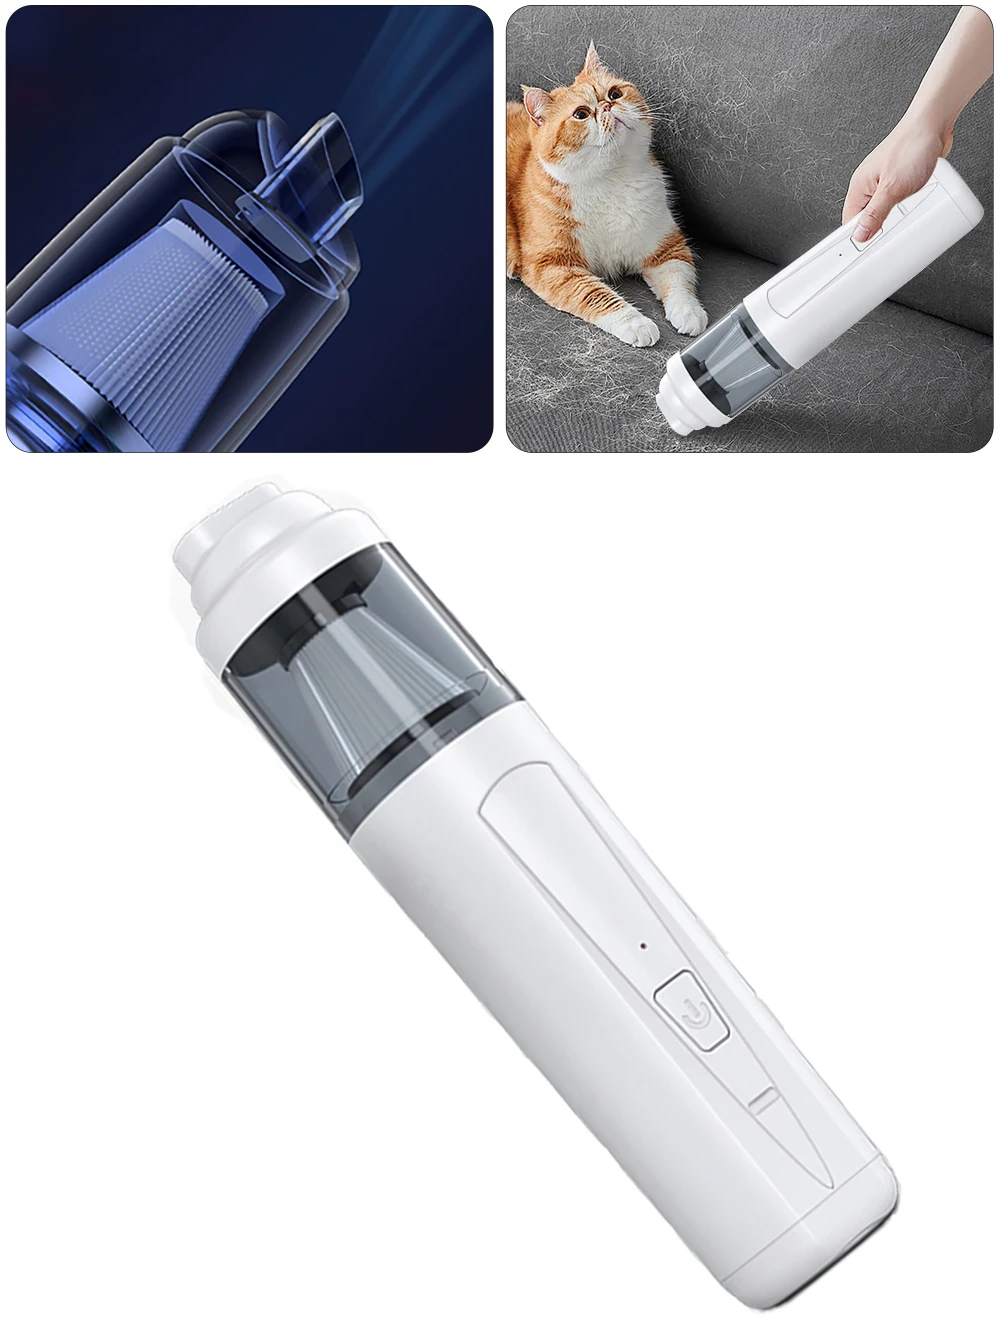 

MD-10 Mini Handheld Portable Car Vacuum Cleaner USB USB Charging Interface Machine For Home Auto Car Vacuum Cleaner